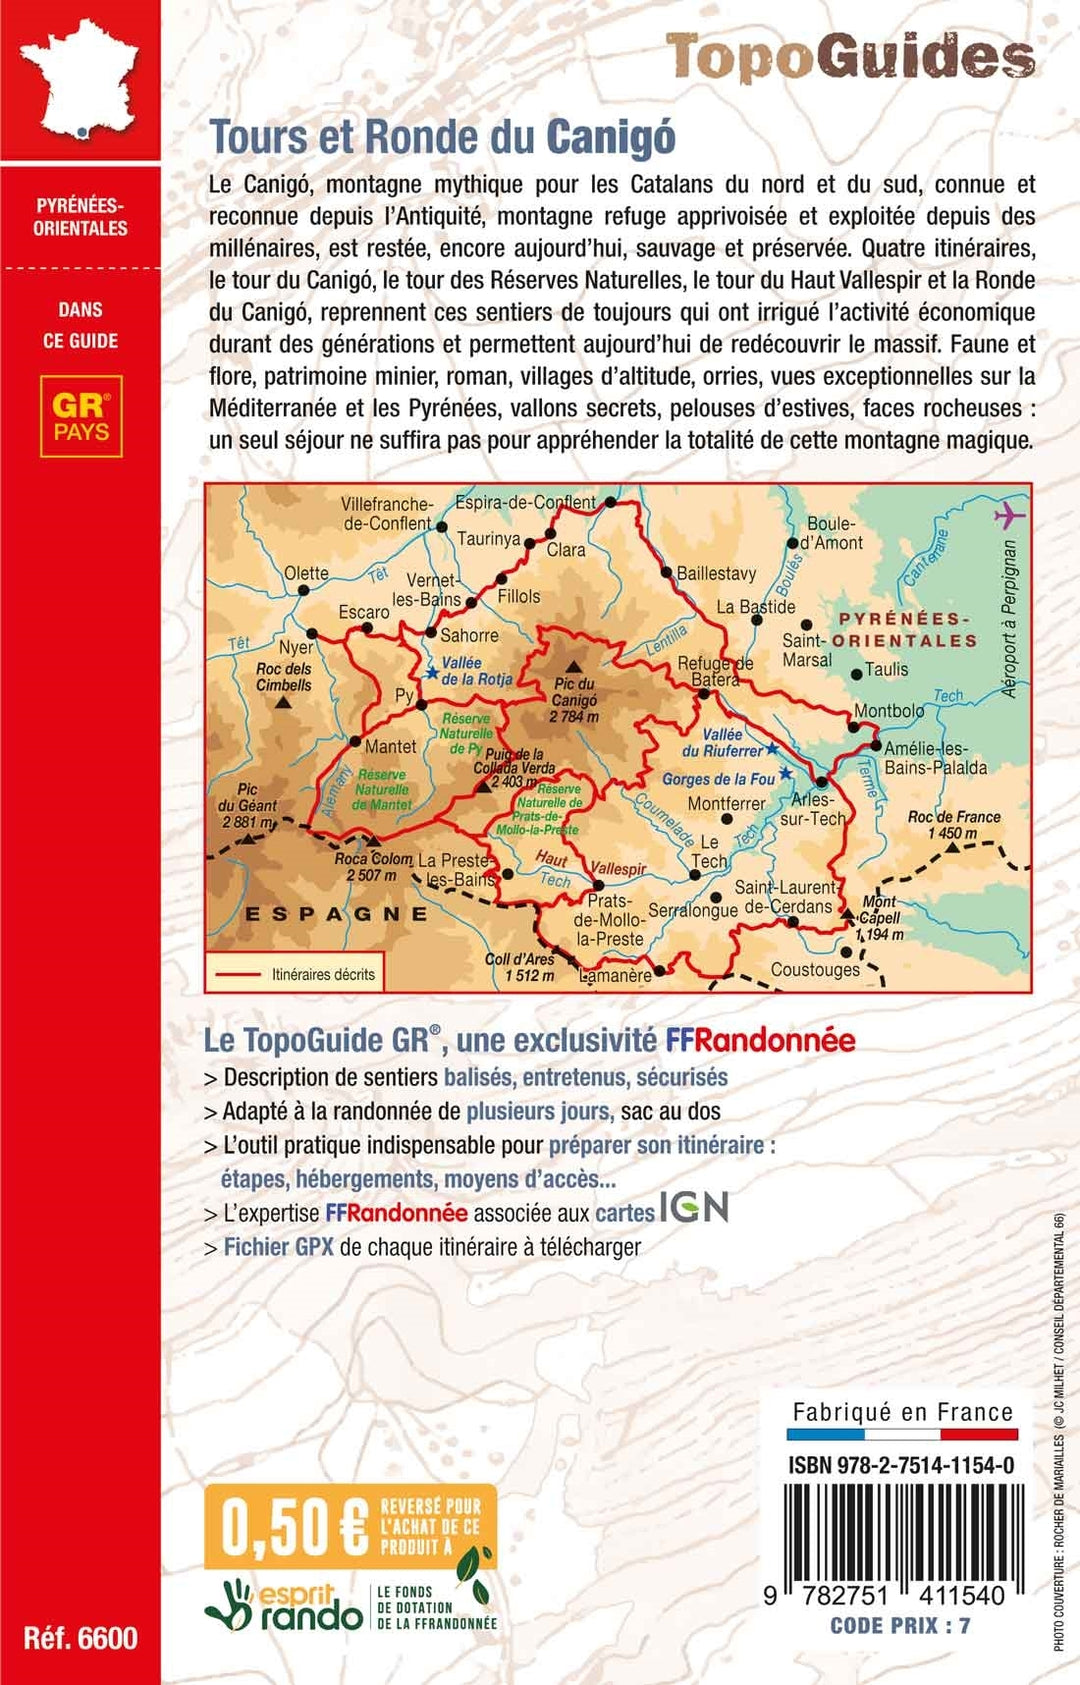 Hiking topoguide - Tours and Round of Canigó | FFR